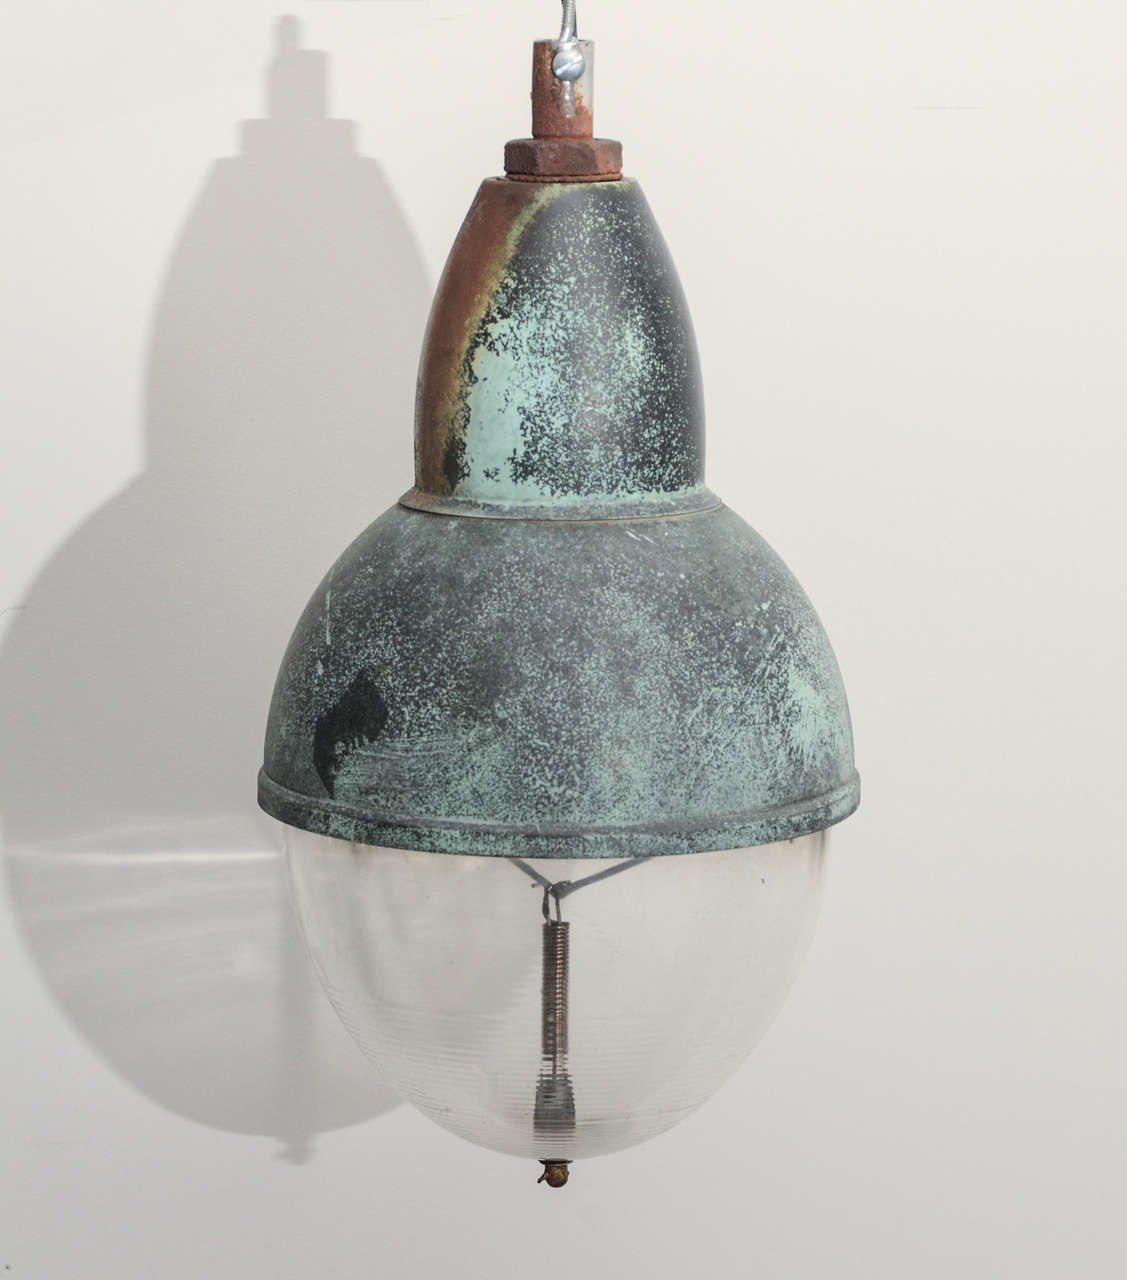 Vintage industrial copper pendant light with glass shade with a beautiful verdigris patina.